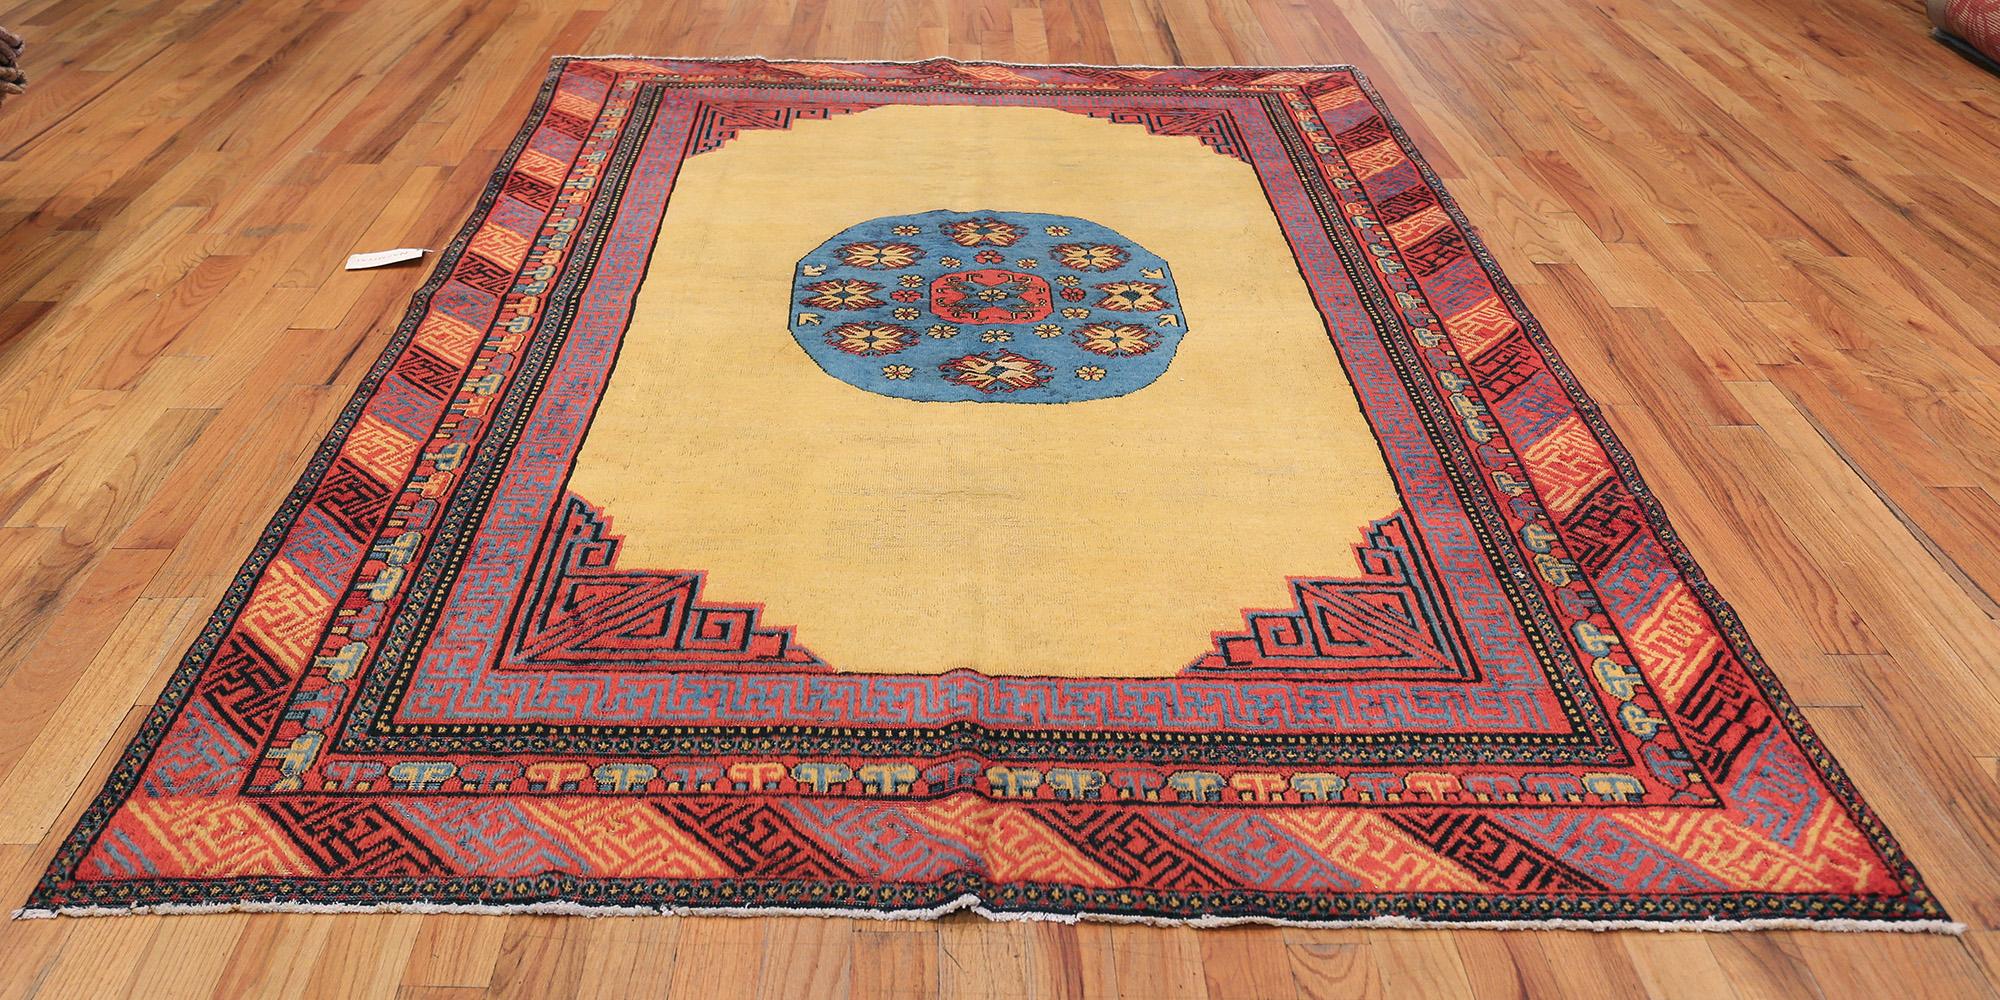 Funky Small  Size Tribal Antique Khotan Rug, Country of Origin / Rug Type: East Turkestan Rug, Circa Date: First Quarter of the 20th Century – A delightful showpiece of vivid colors and bold shapes, this antique Khotan rug centers around a rounded,